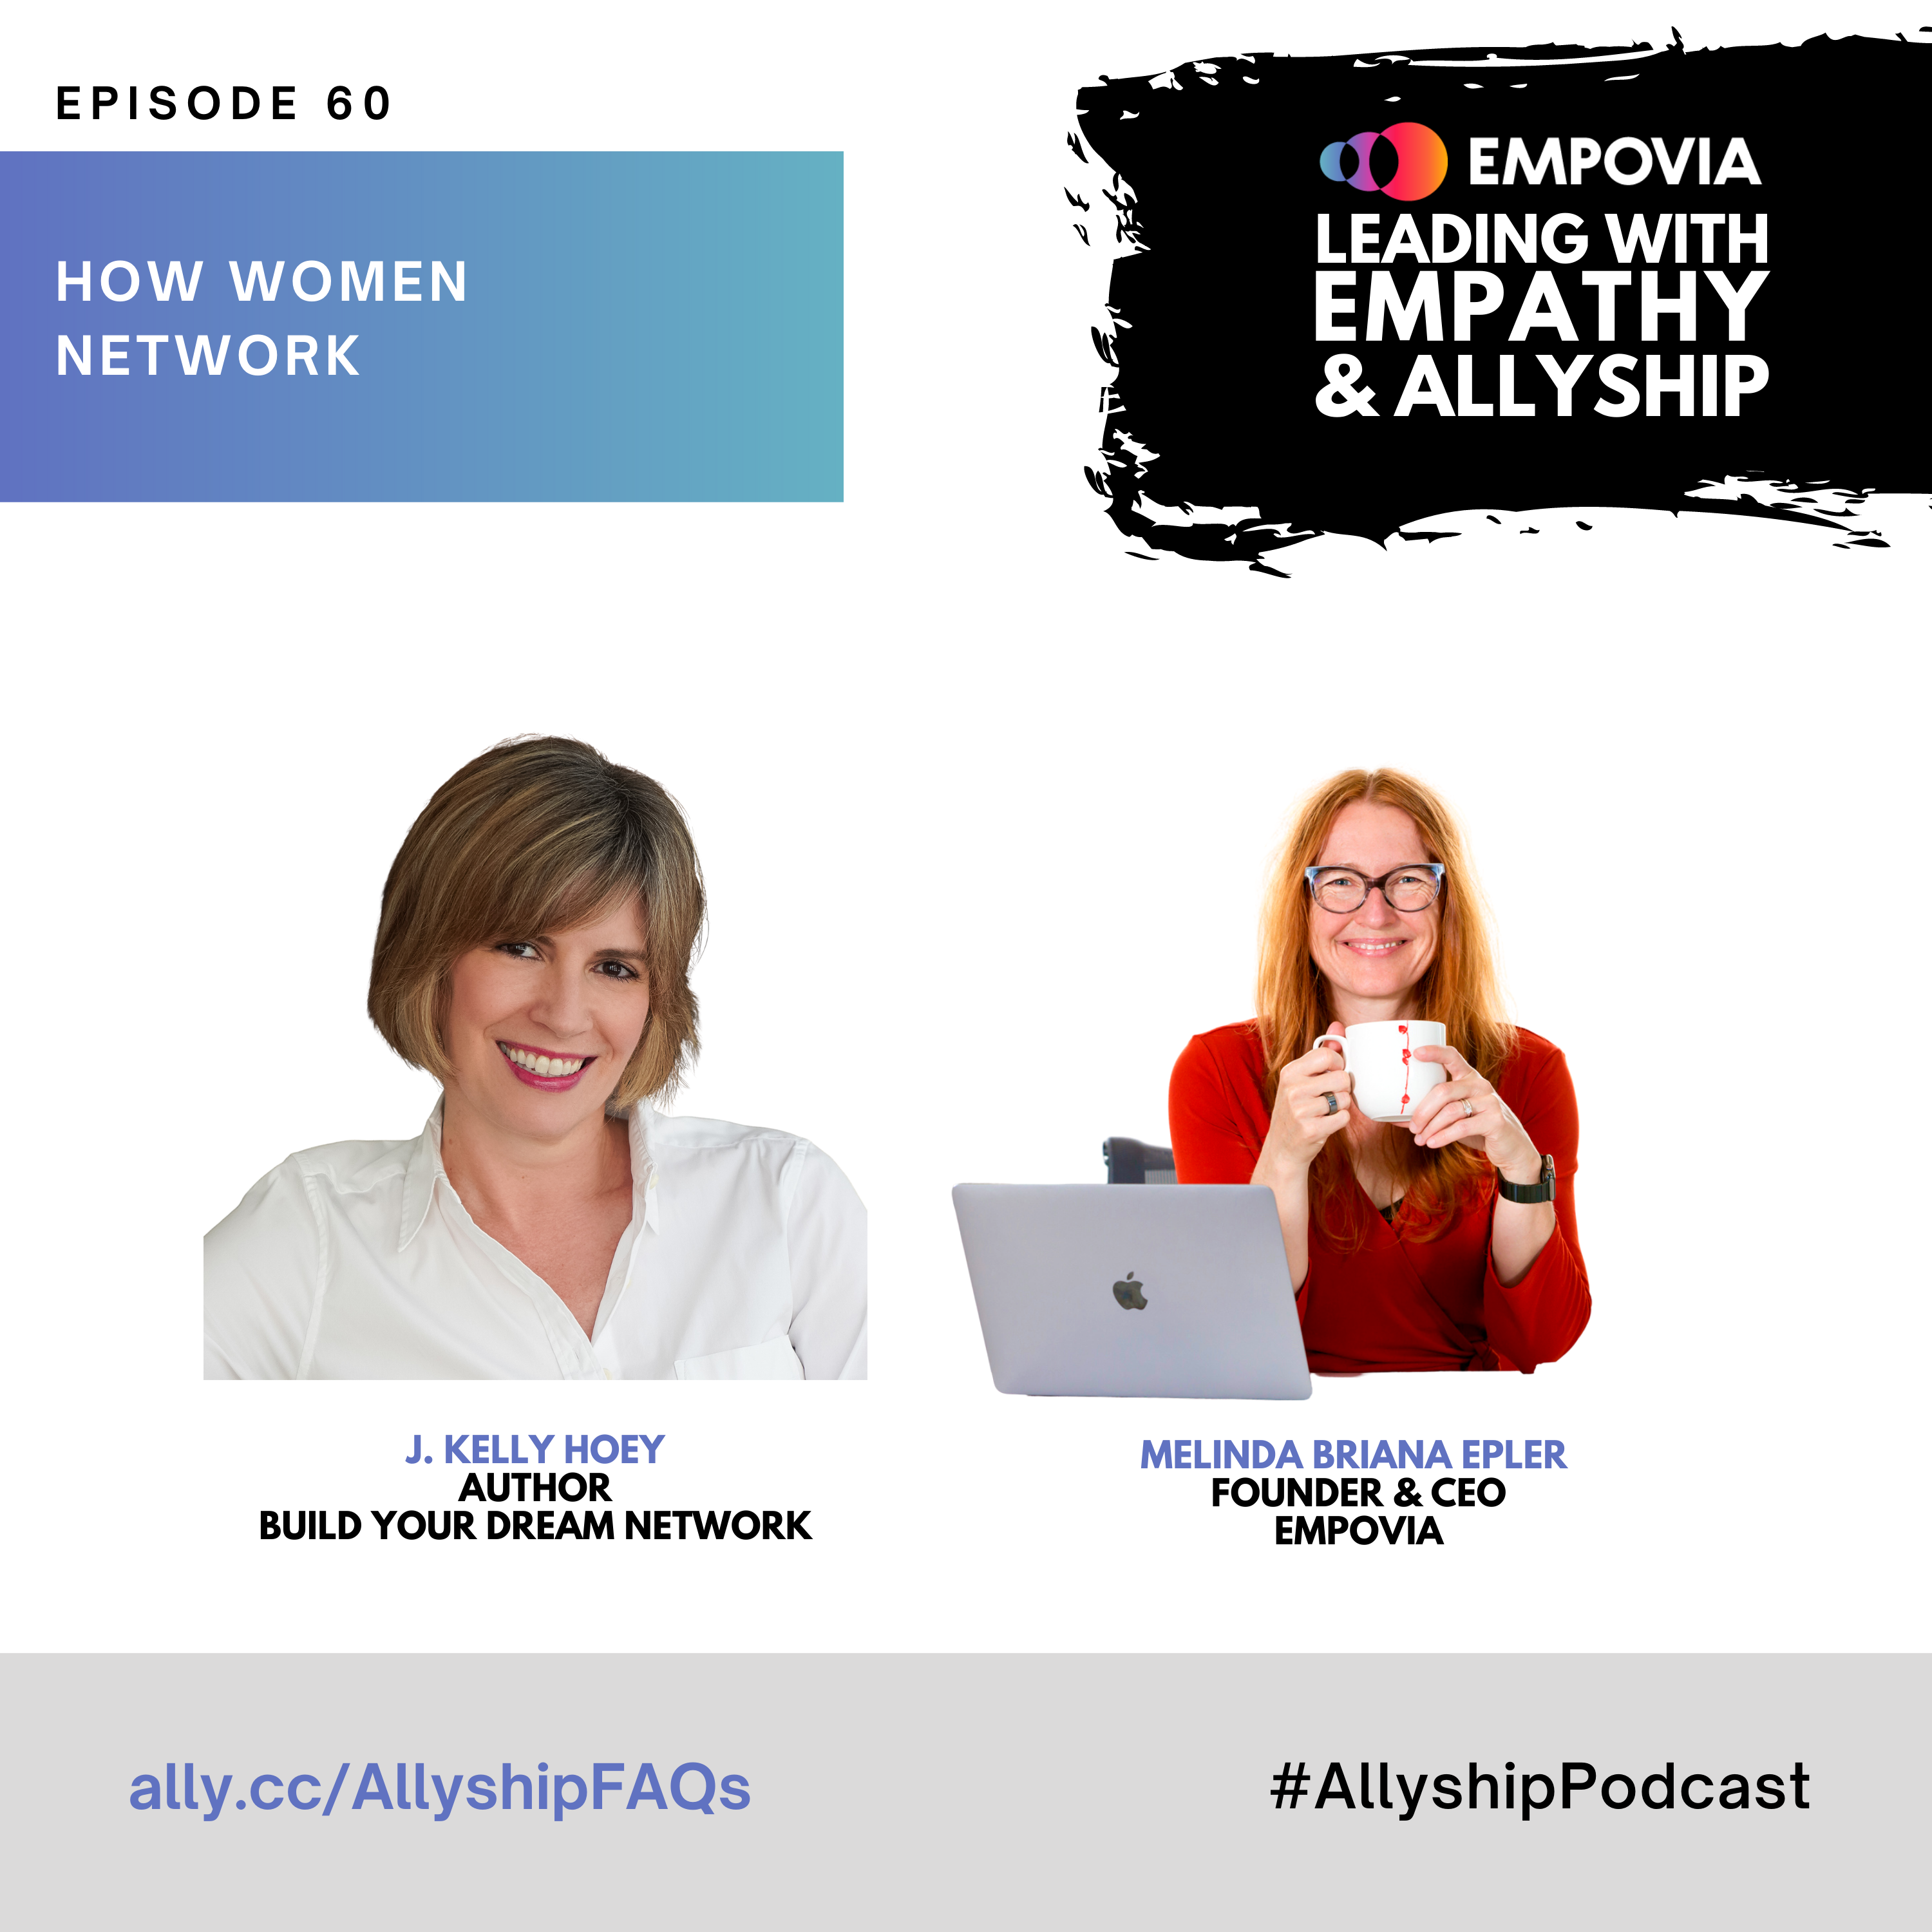 Leading With Empathy & Allyship promo with the Empovia logo and photos of Kelly Hoey; a White female with dirty blonde hair in white blouse; and host Melinda Briana Epler; a White woman with red hair, glasses, and orange shirt holding a white mug behind a laptop.